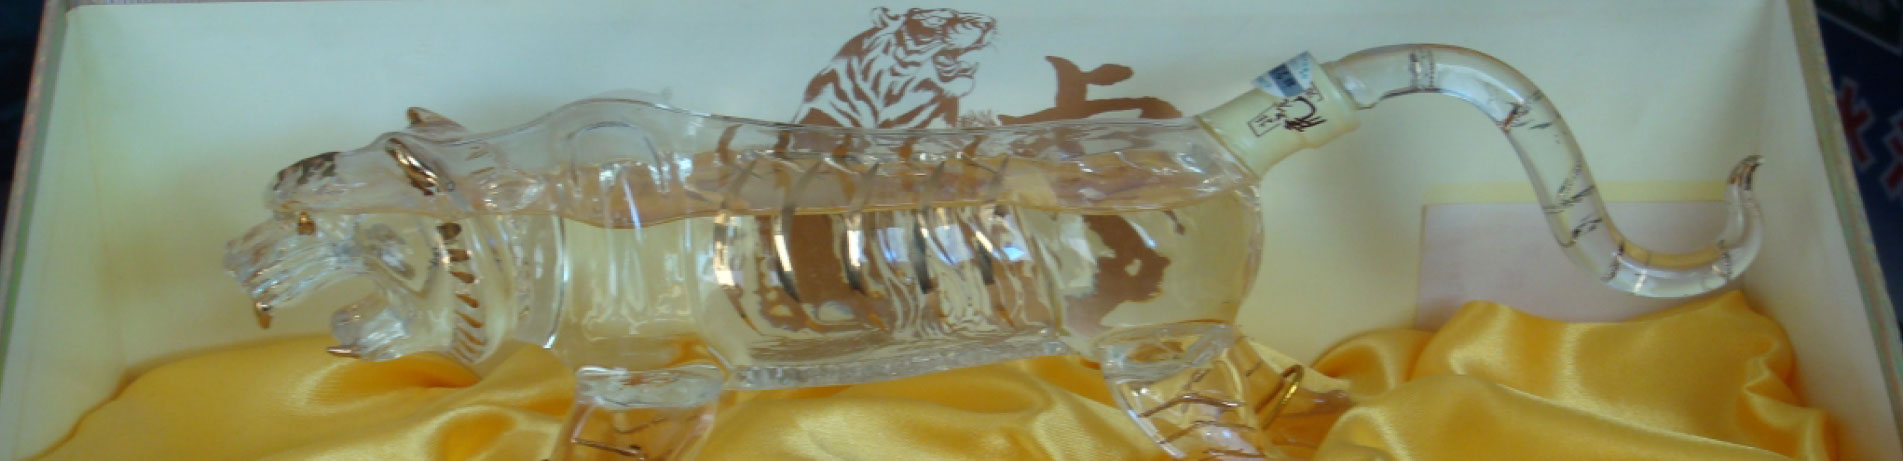 A tiger-shaped bottle of bone strengthening wile for sale, Qinhuangdao, China